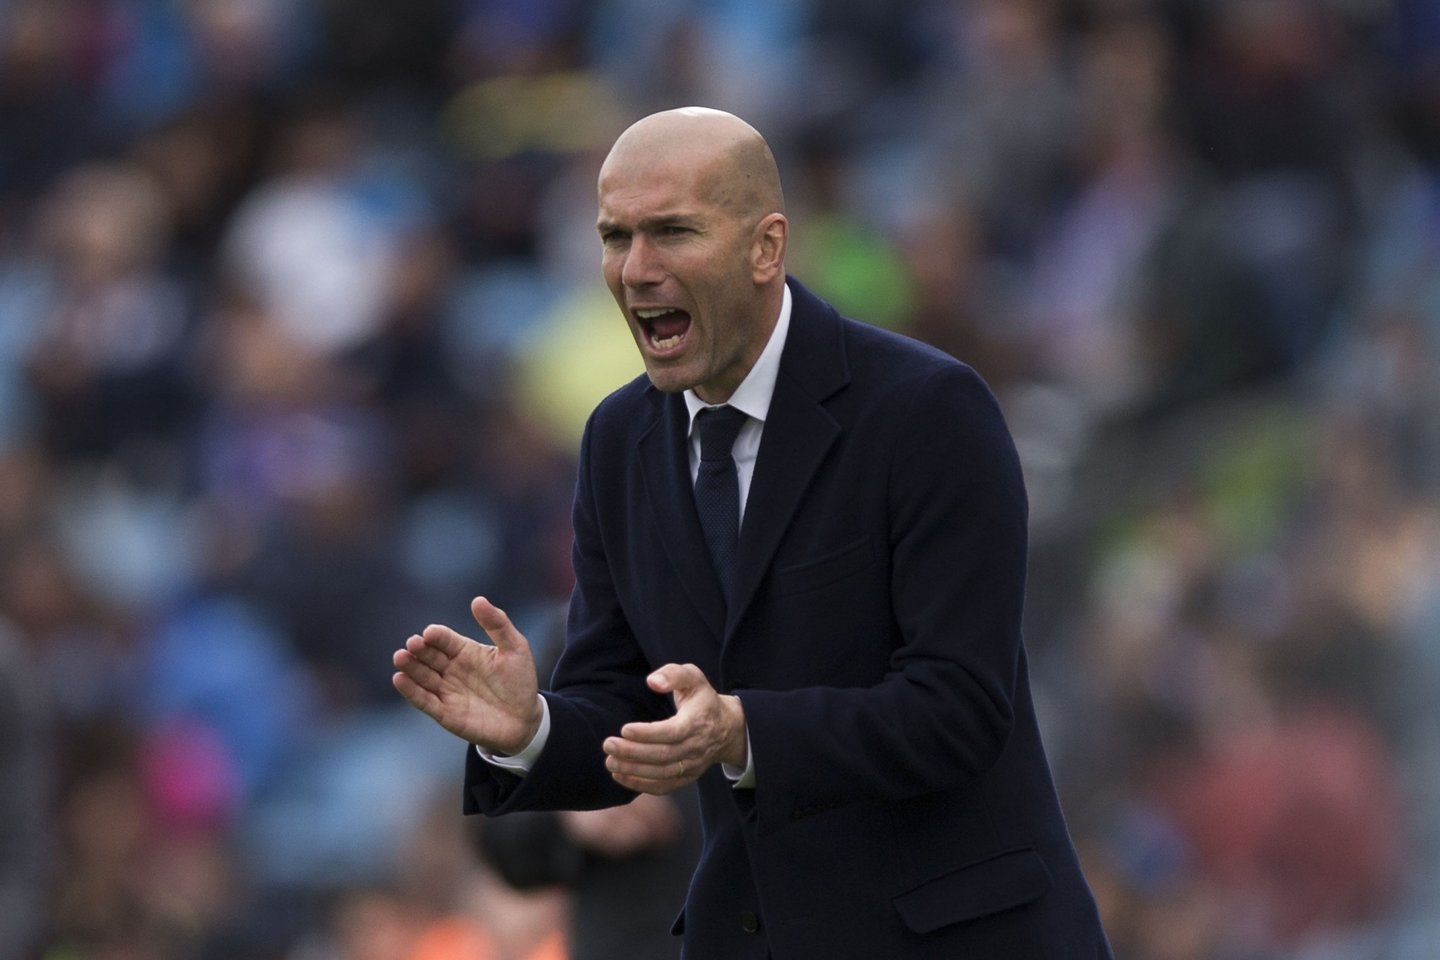 GETAFE, SPAIN - APRIL 16: Coach Zinedine Zidane of Real Madrid CF encourages his team during the La Liga match between Getafe CF and Real Madrid CF at Coliseum Alfonso Perez on April 16, 2016 in Getafe, Spain. (Photo by Gonzalo Arroyo Moreno/Getty Images)